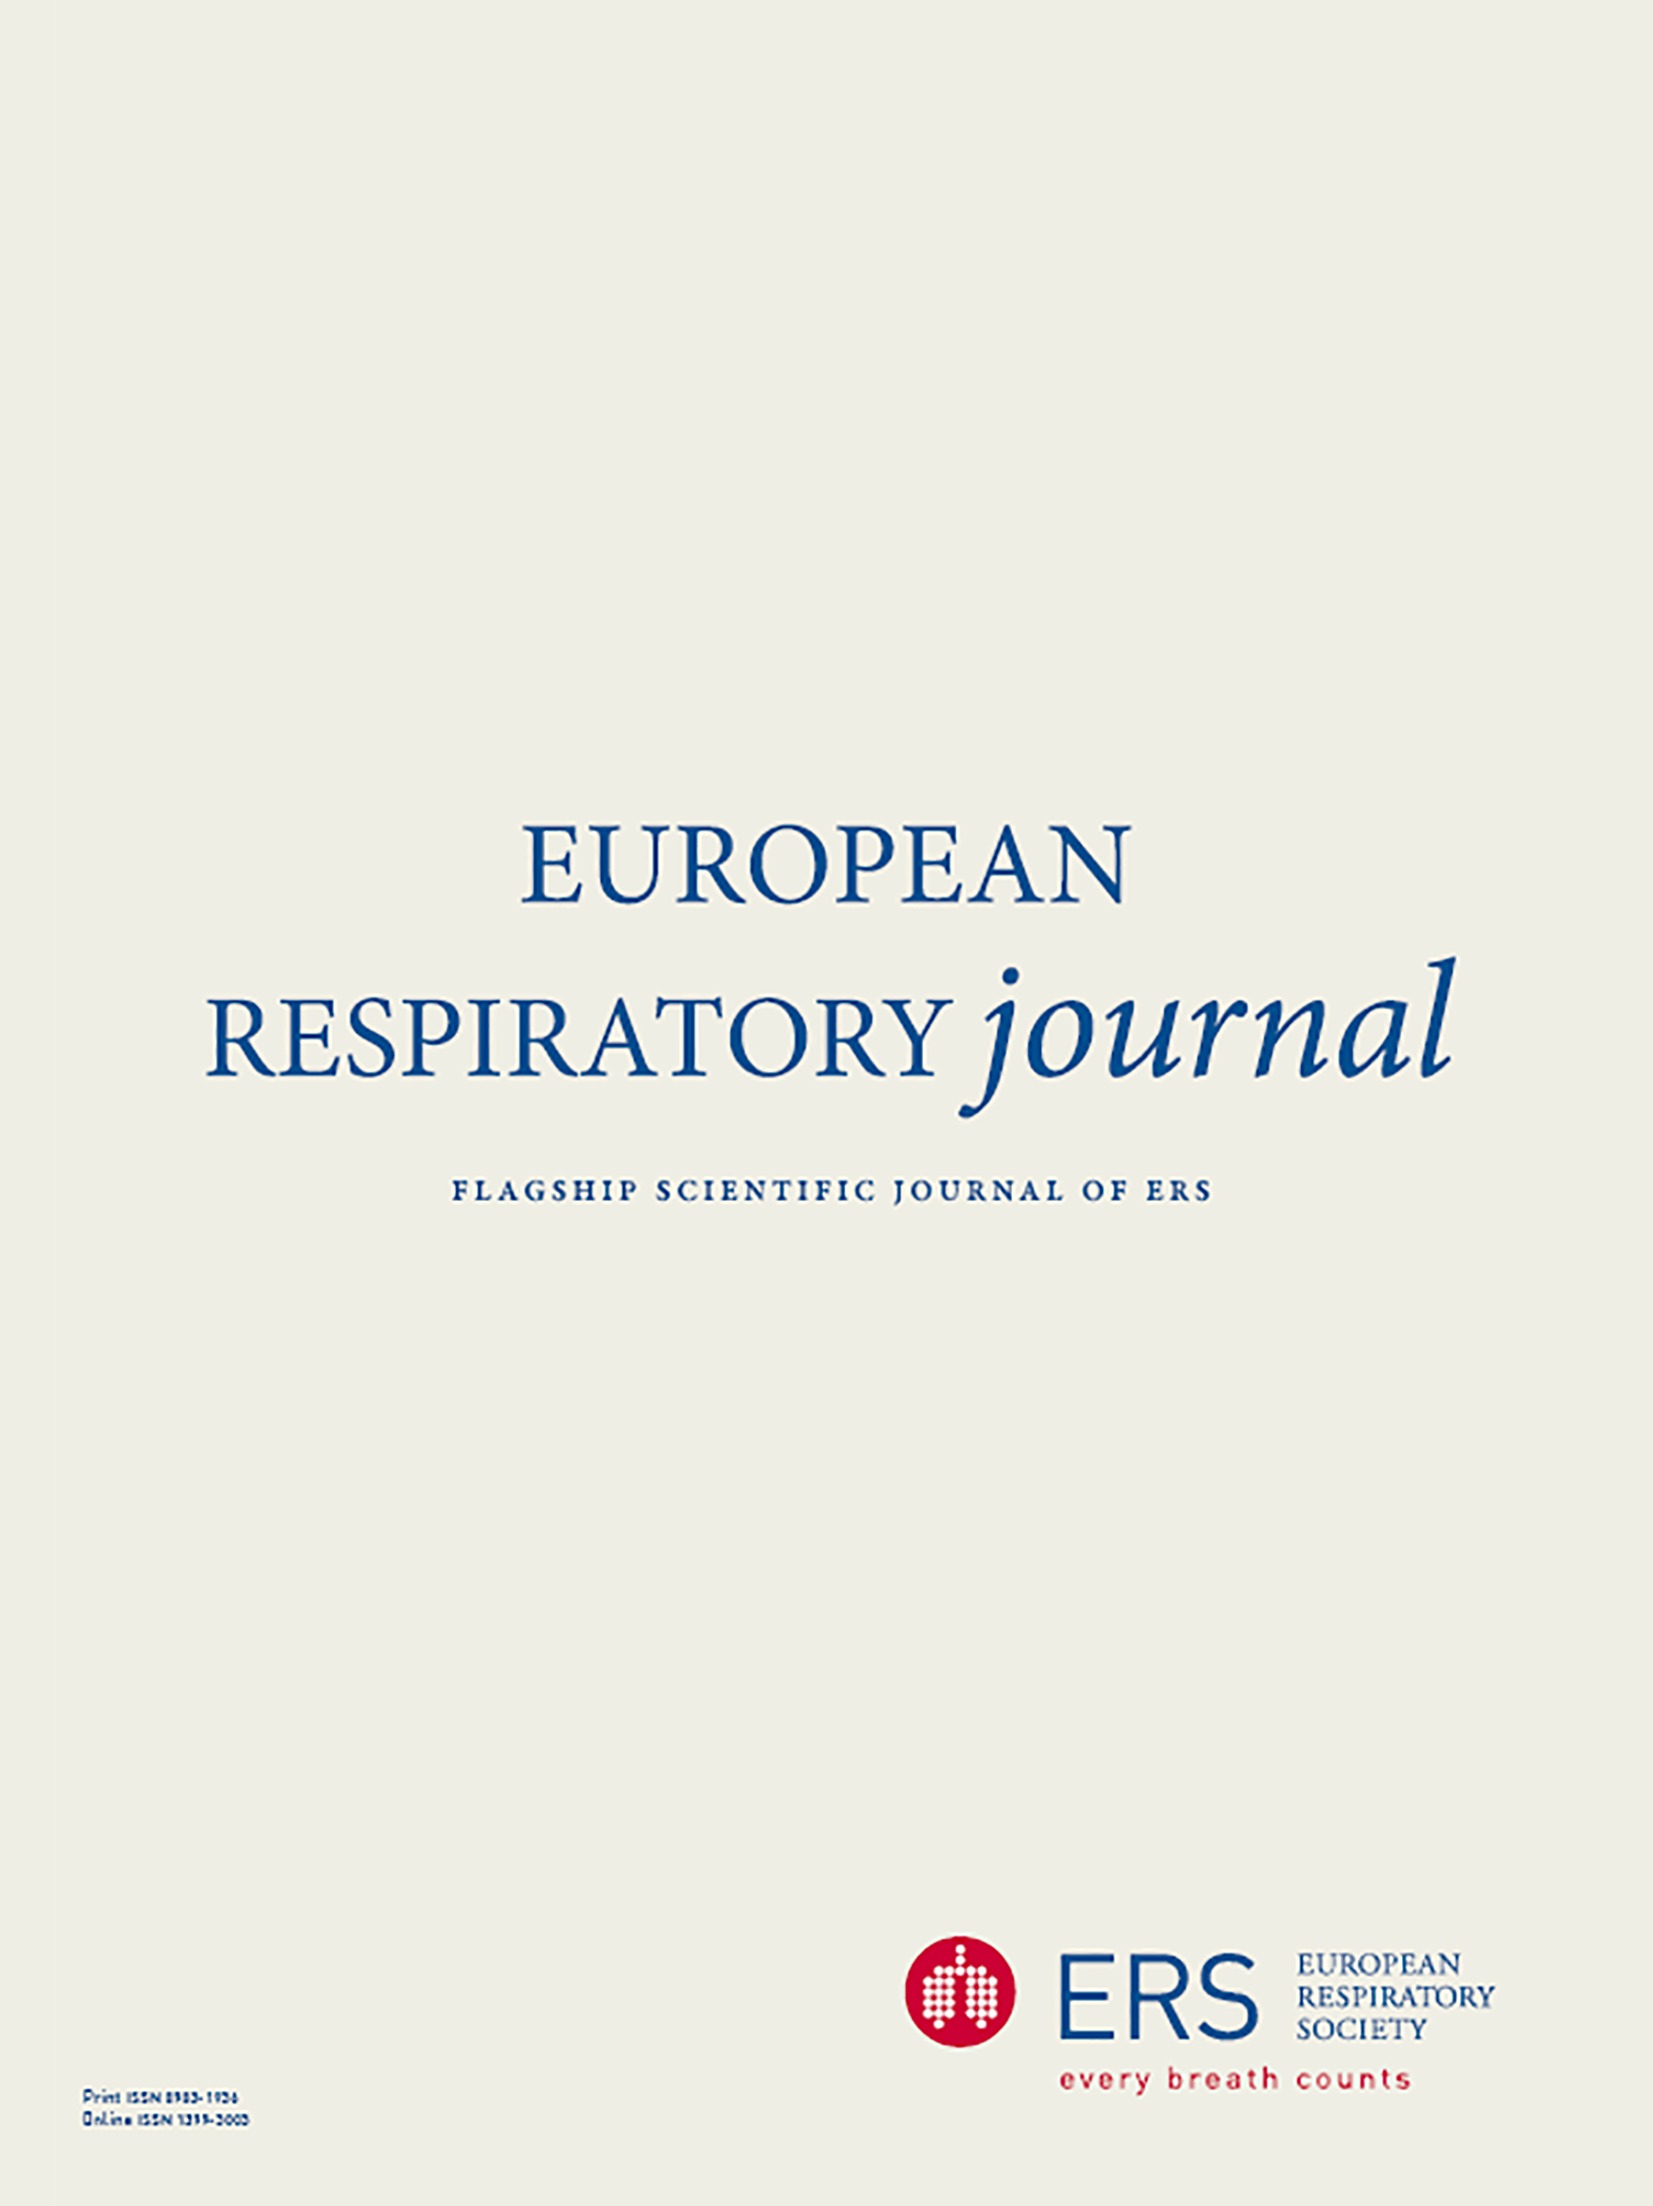 Children and the European Respiratory Society: from silos to synergies